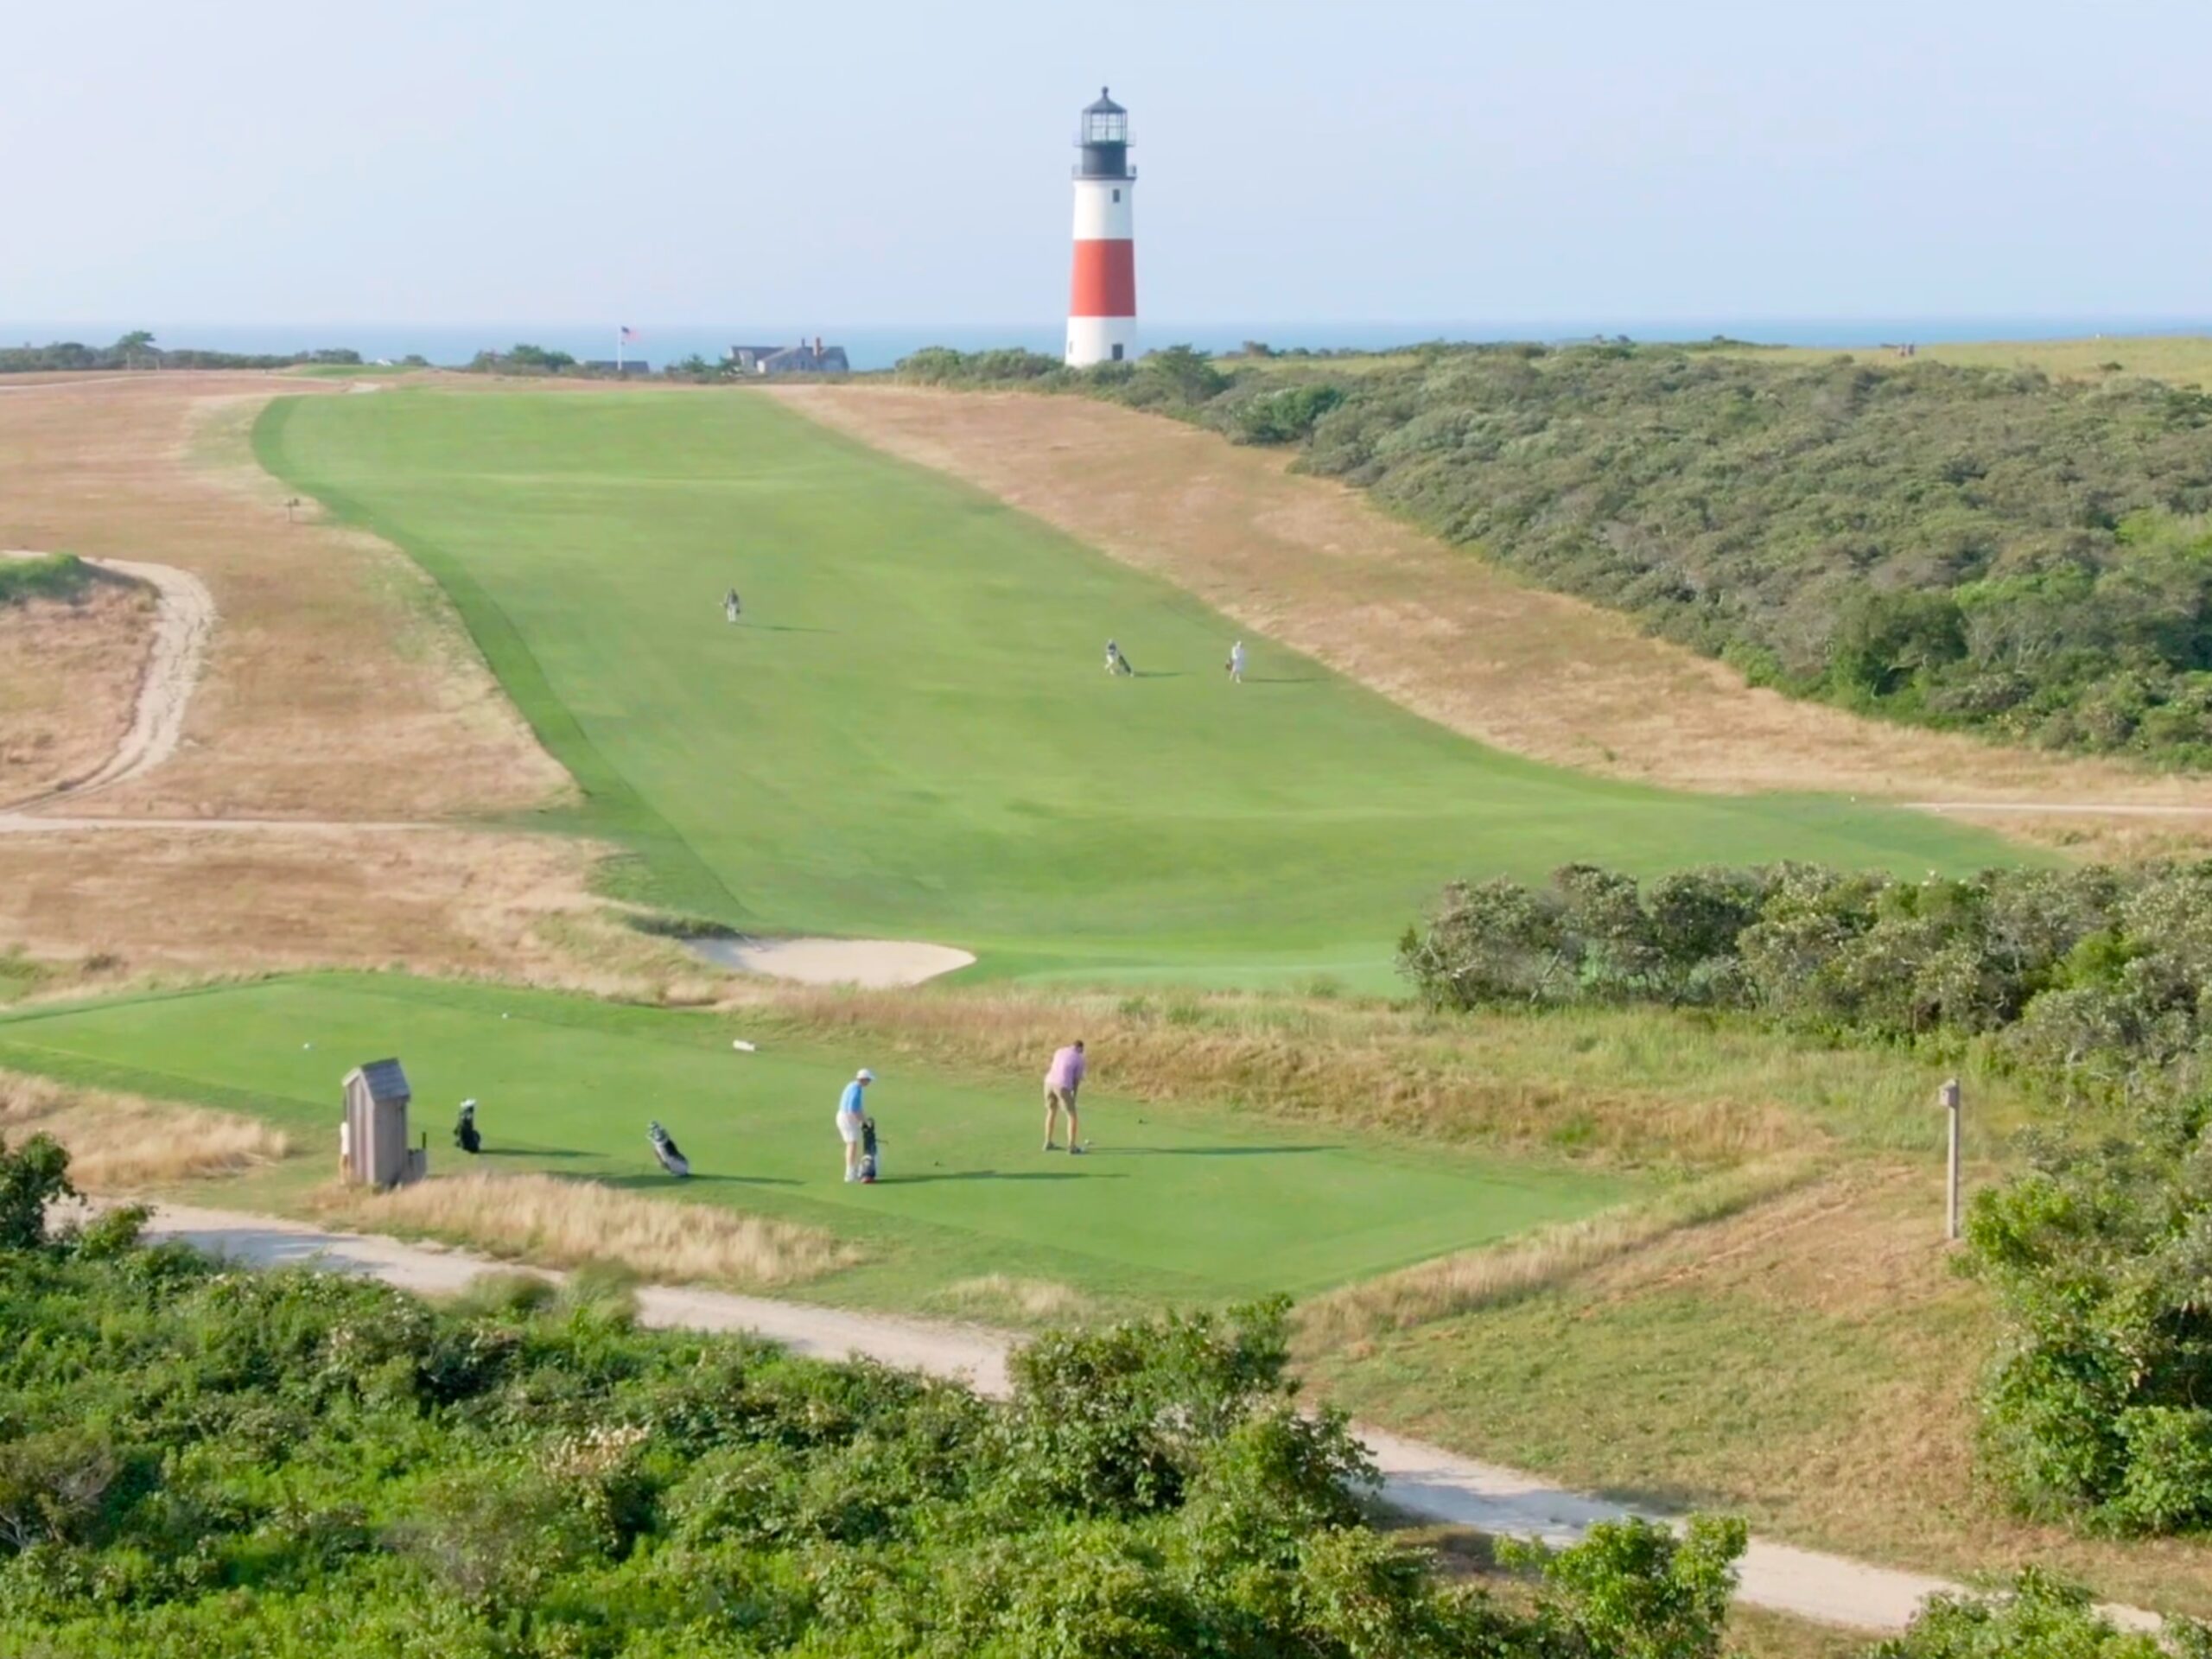 Stock footage of Nantucket's scenic landscapes for real estate social media content.